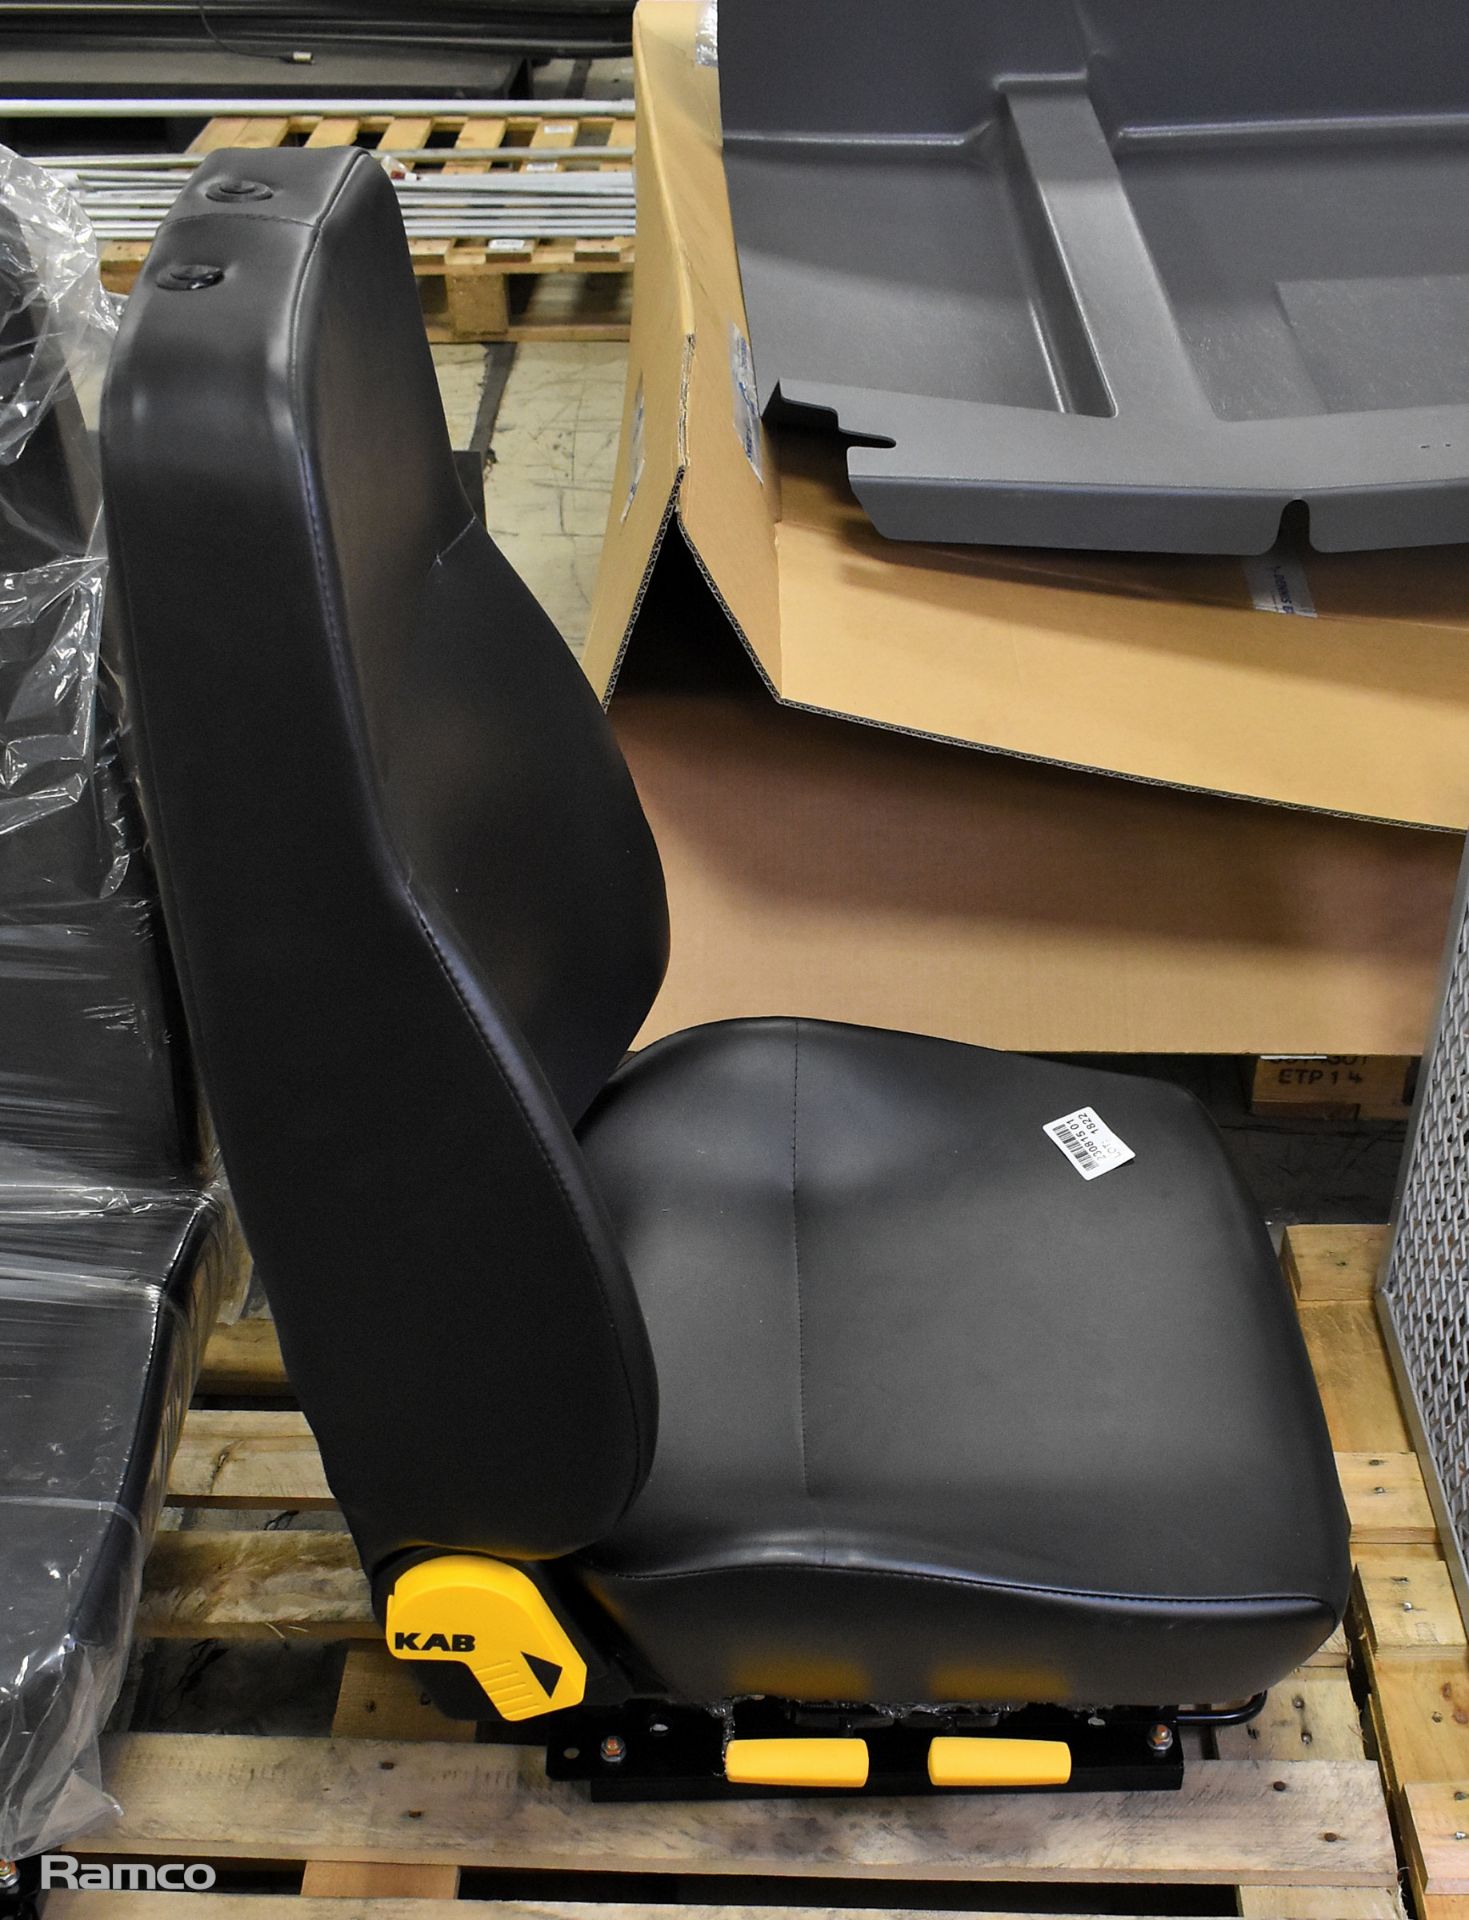 2x KAB seats - upholstered - Image 5 of 8